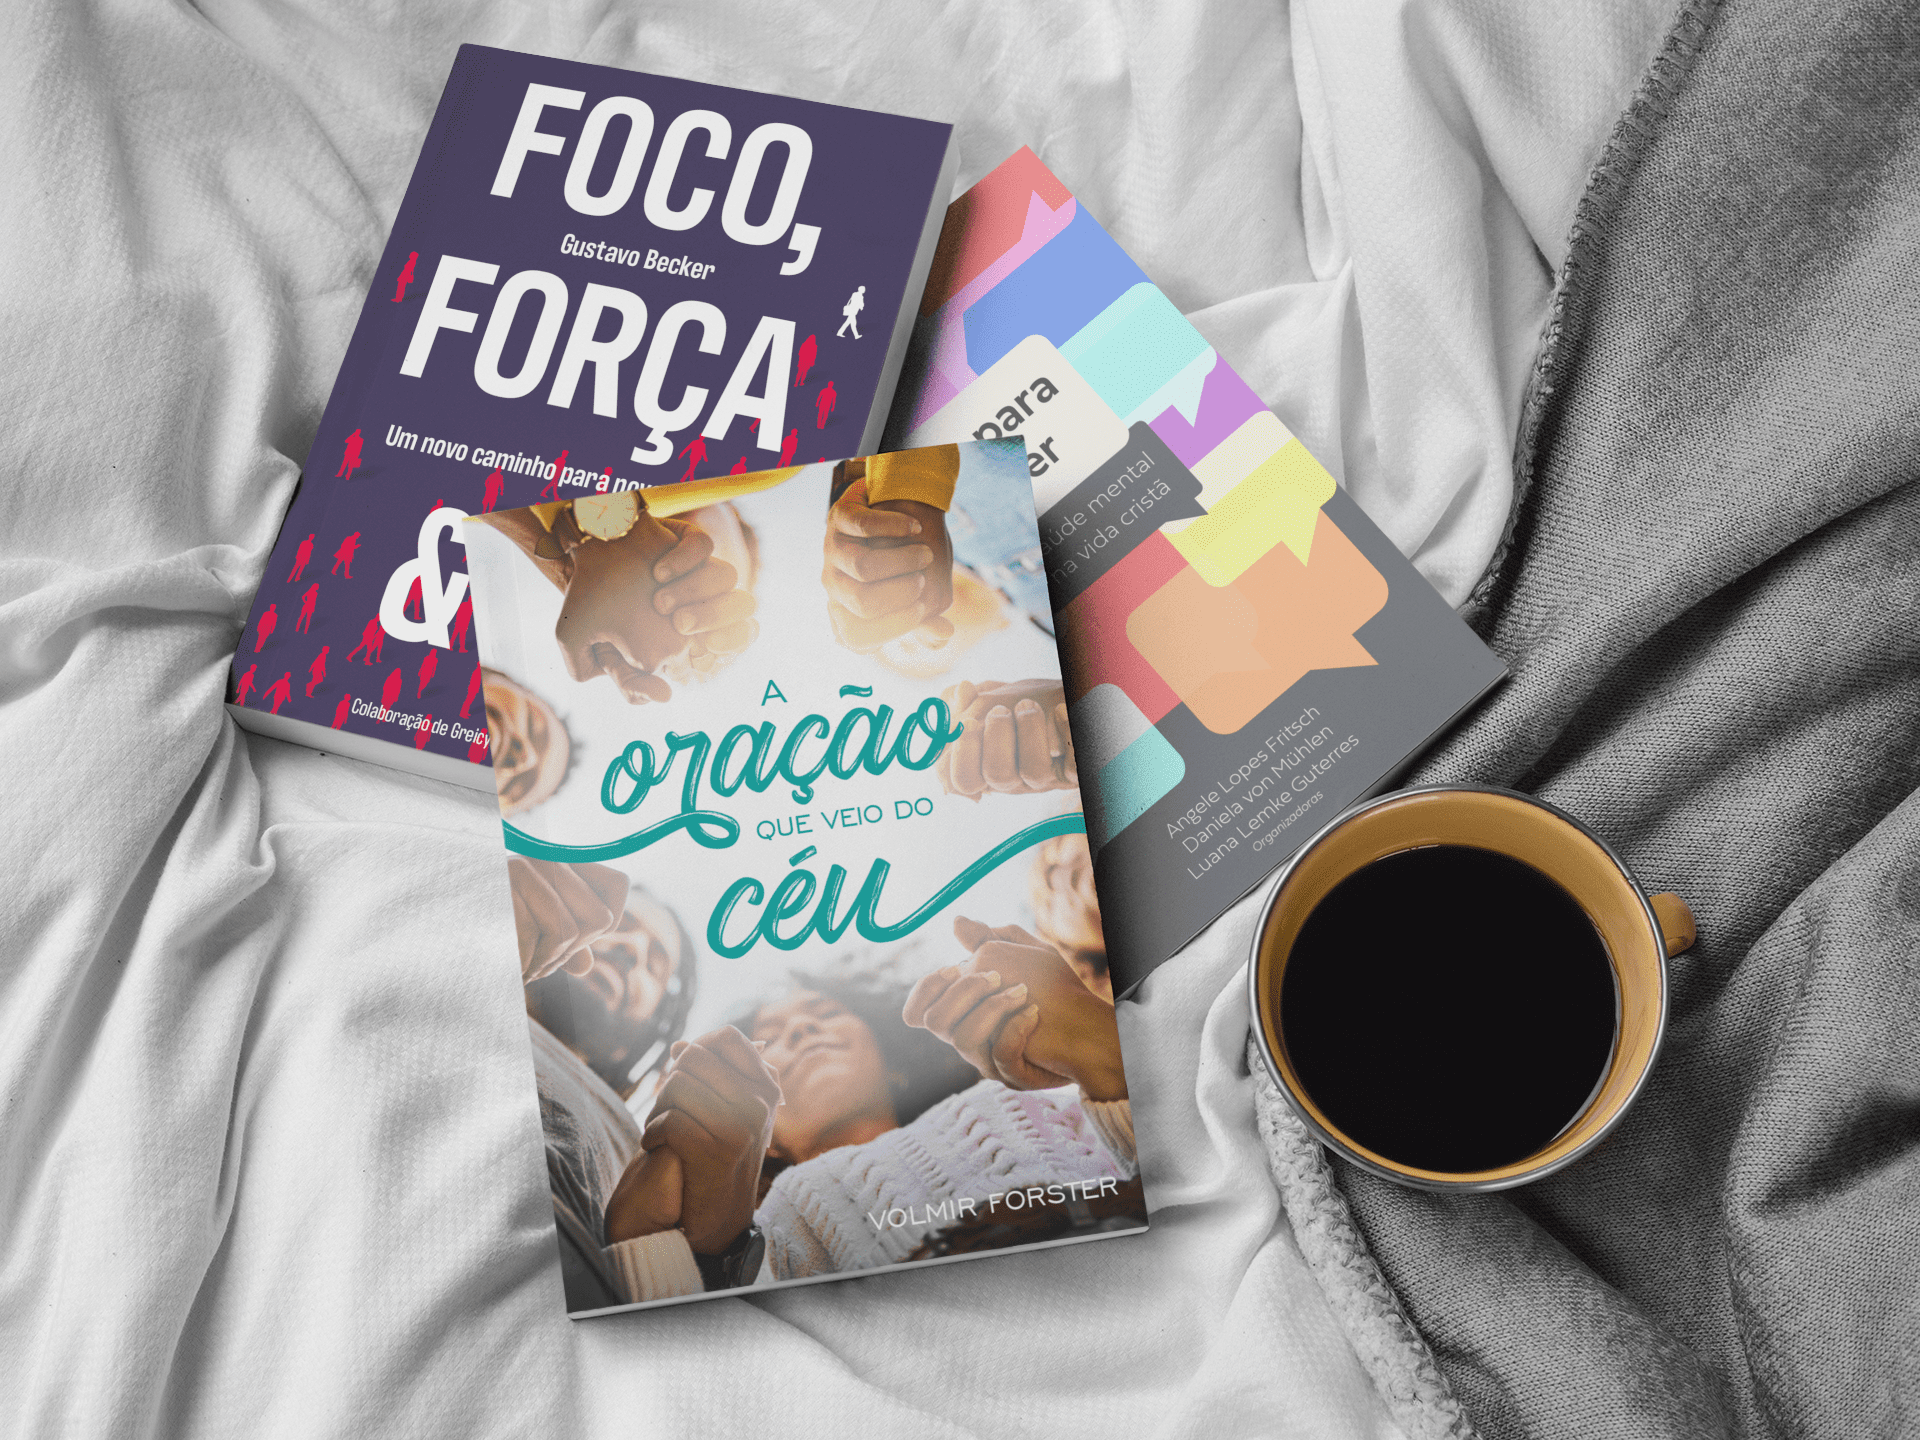 three-messy-books-mockup-on-a-bed-near-a-coffee-cup-a17404